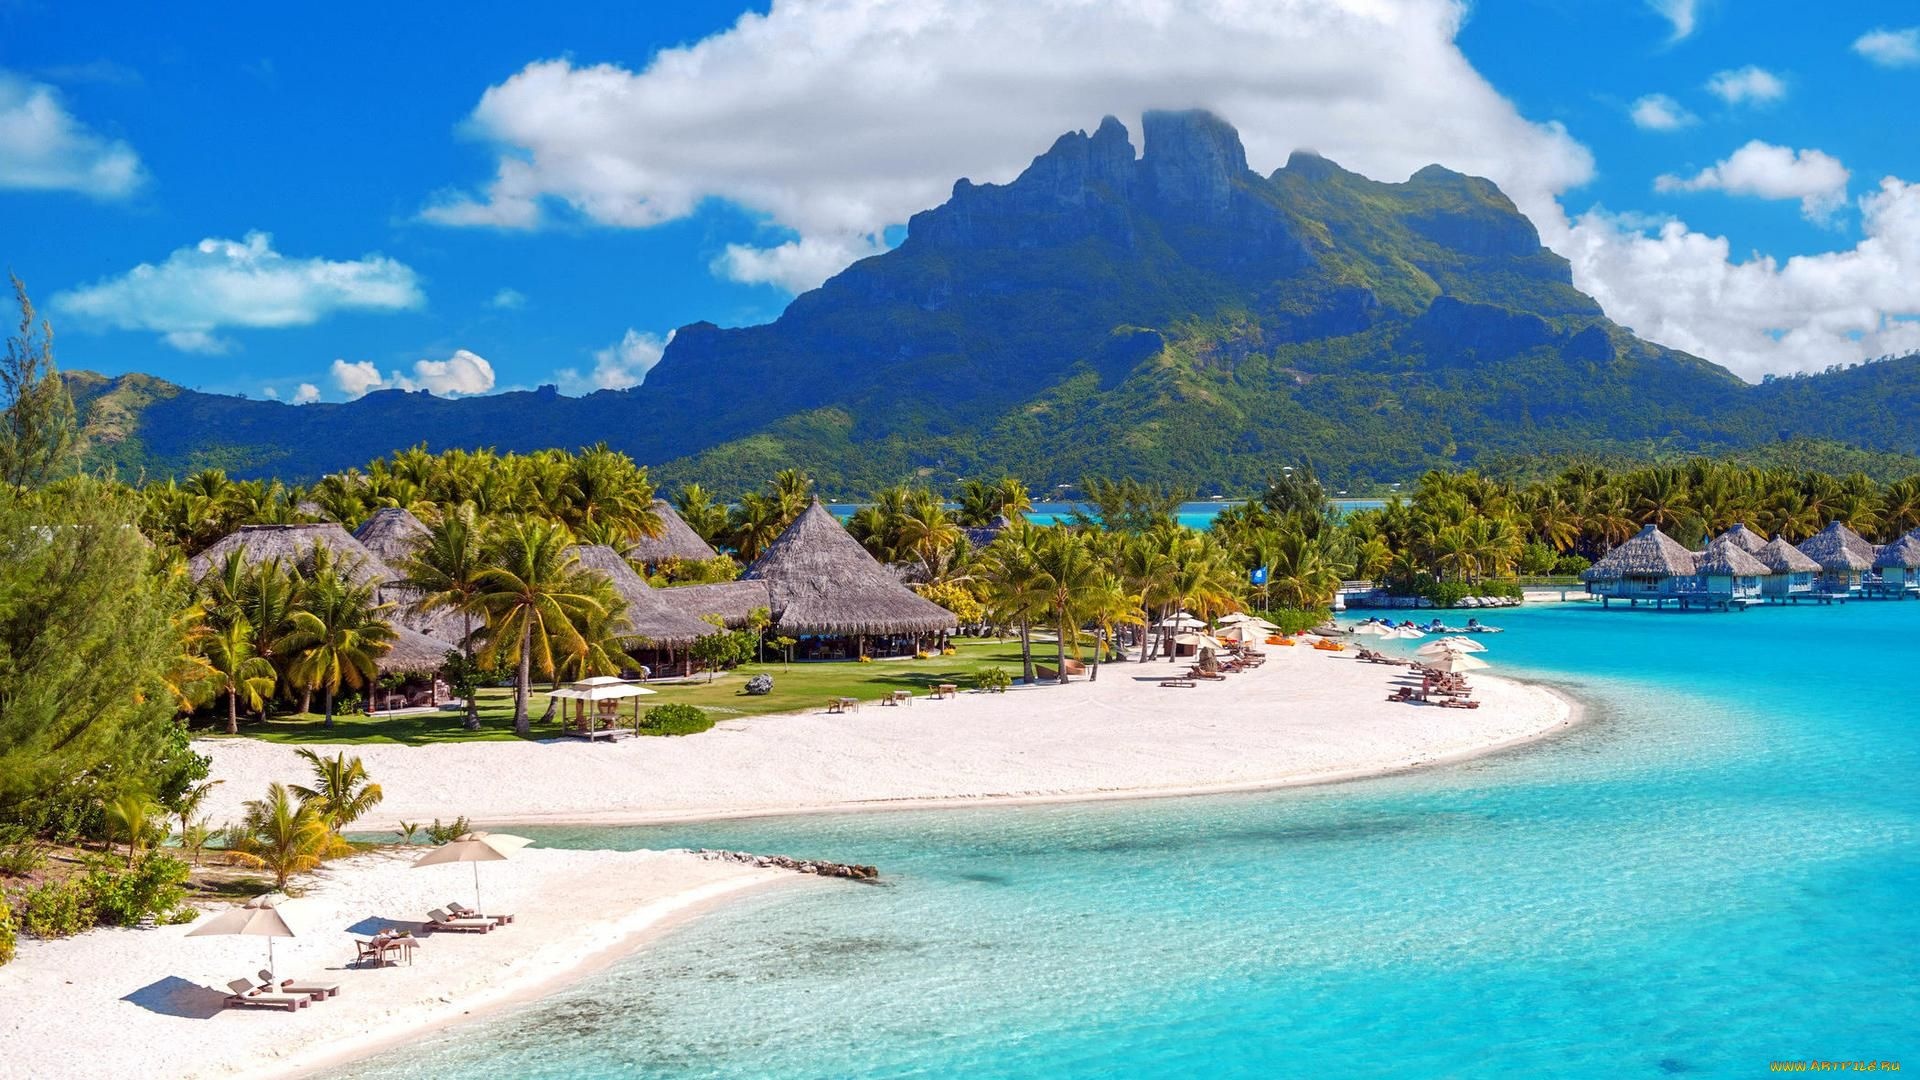 Bora Bora: The middle of the Society archipelago, The Pearl of the Pacific Ocean. 1920x1080 Full HD Wallpaper.